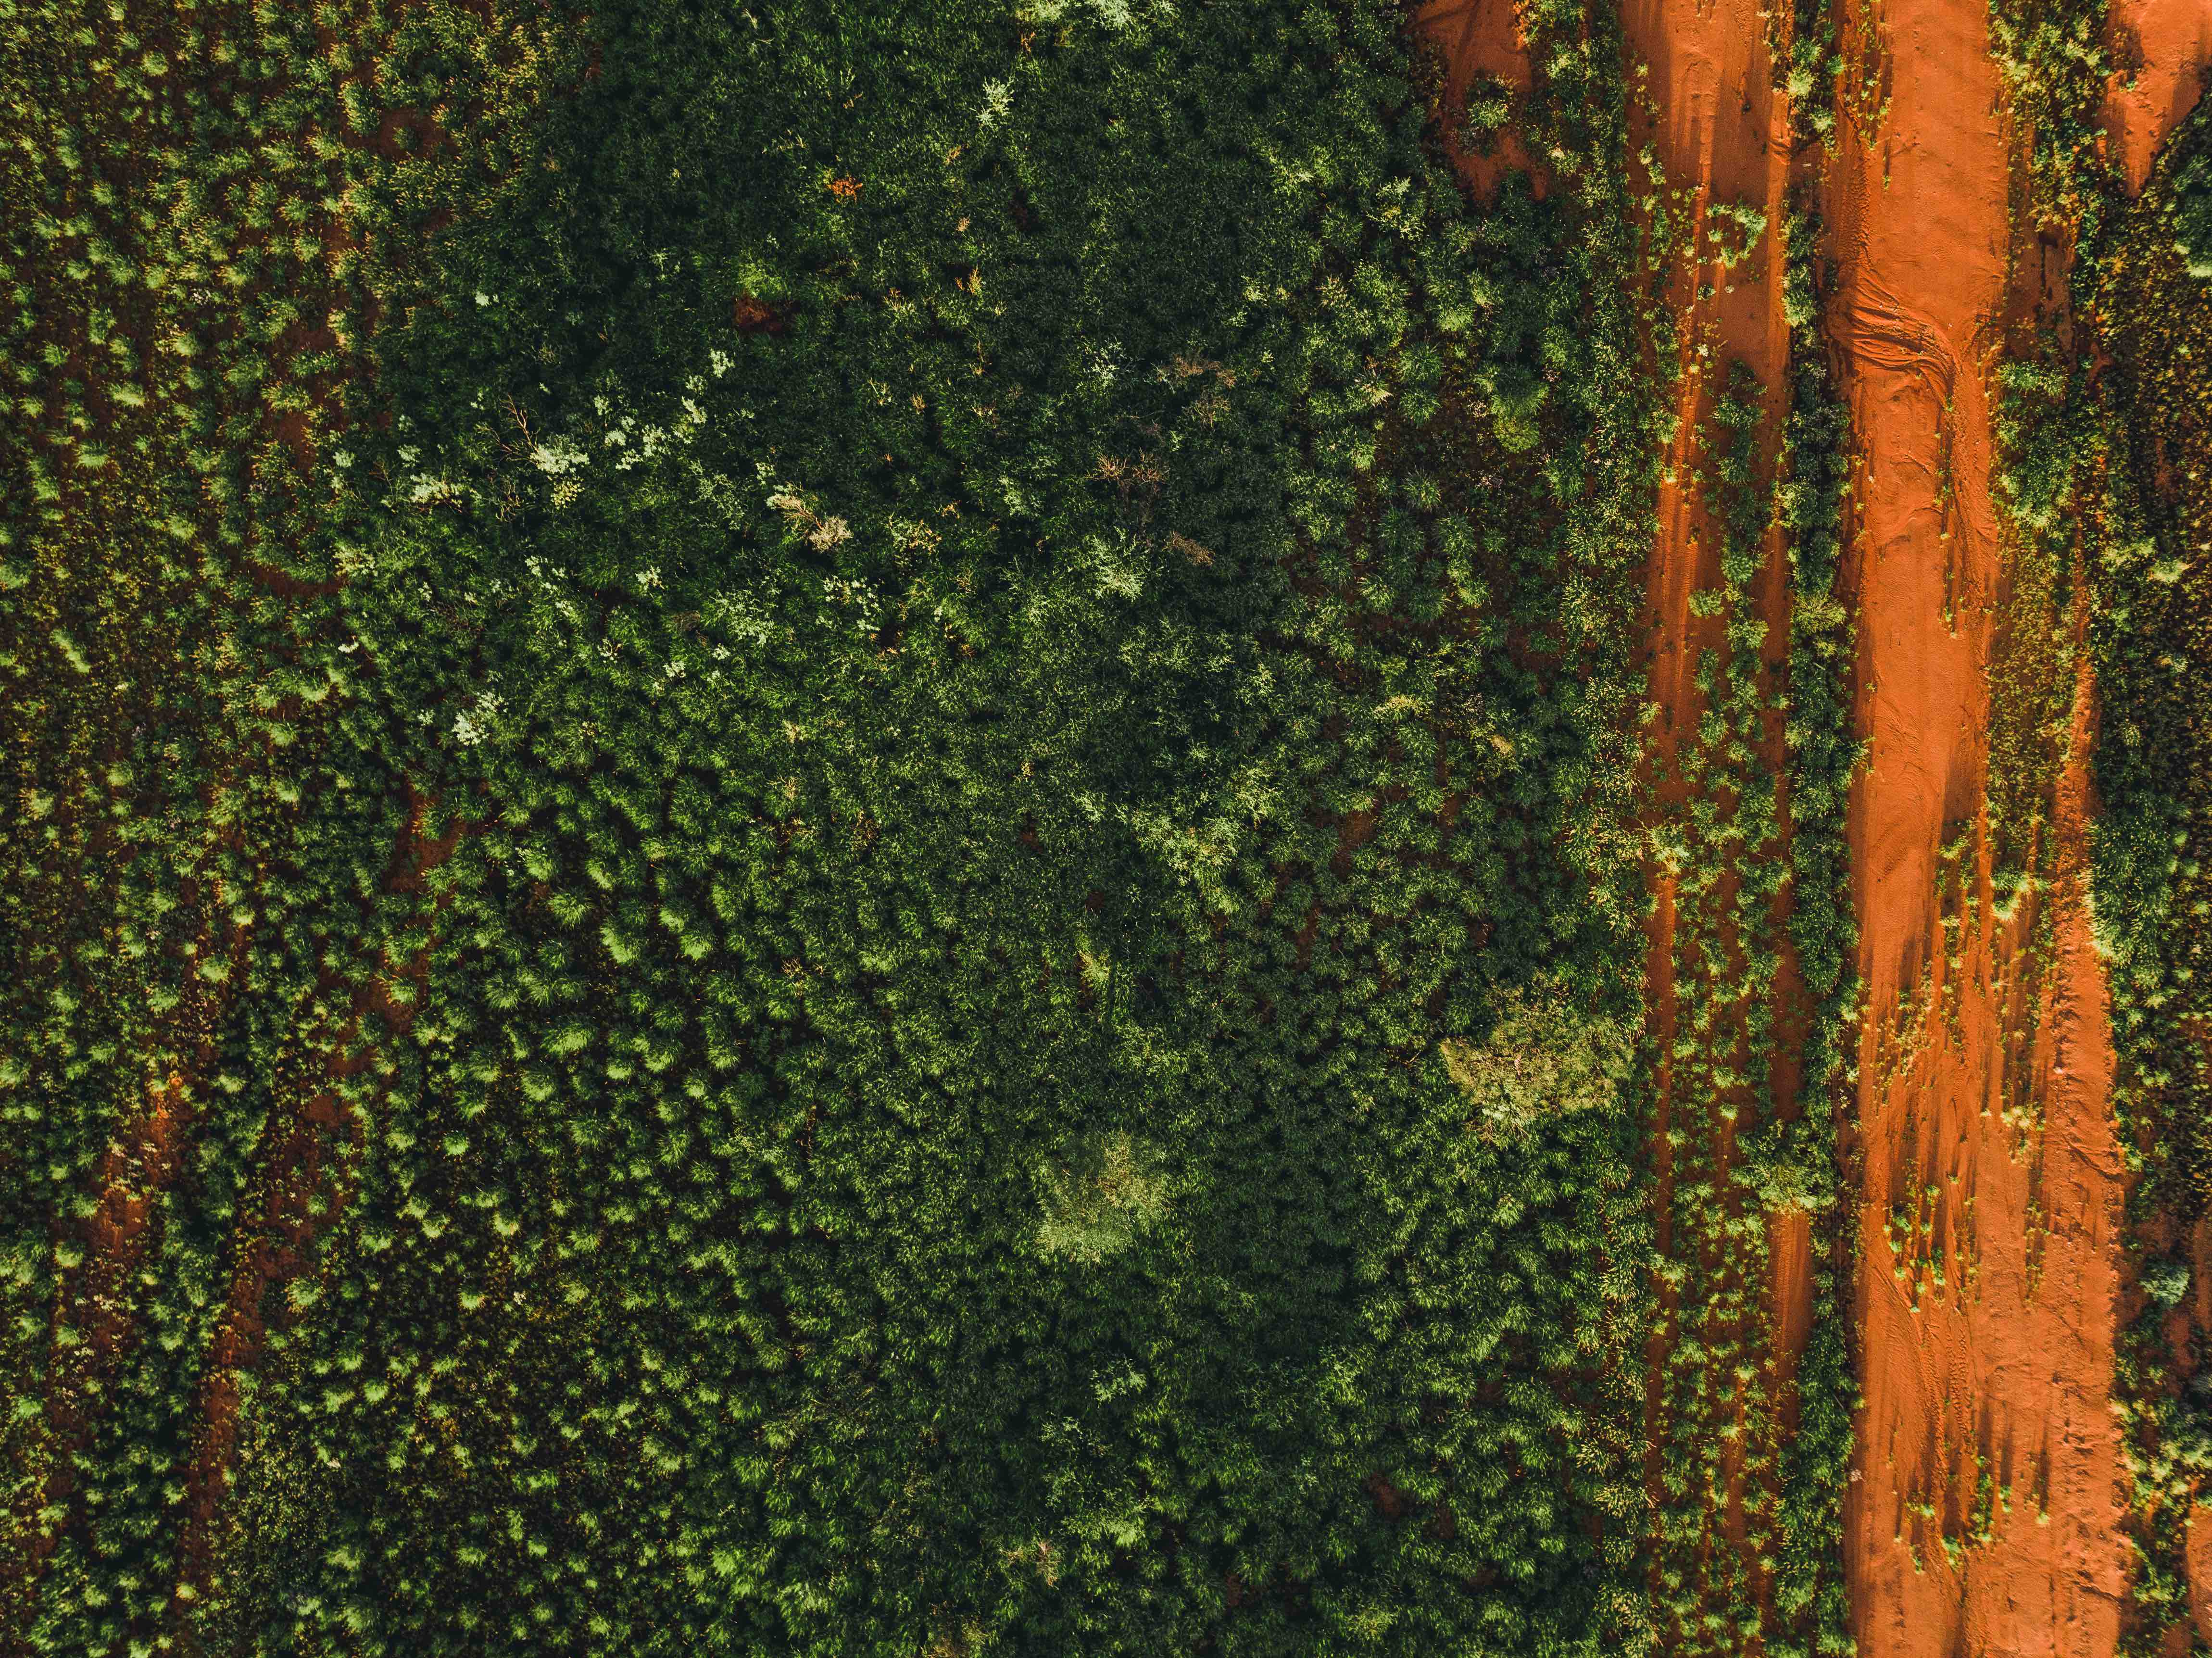 Green and orange forestry view from above